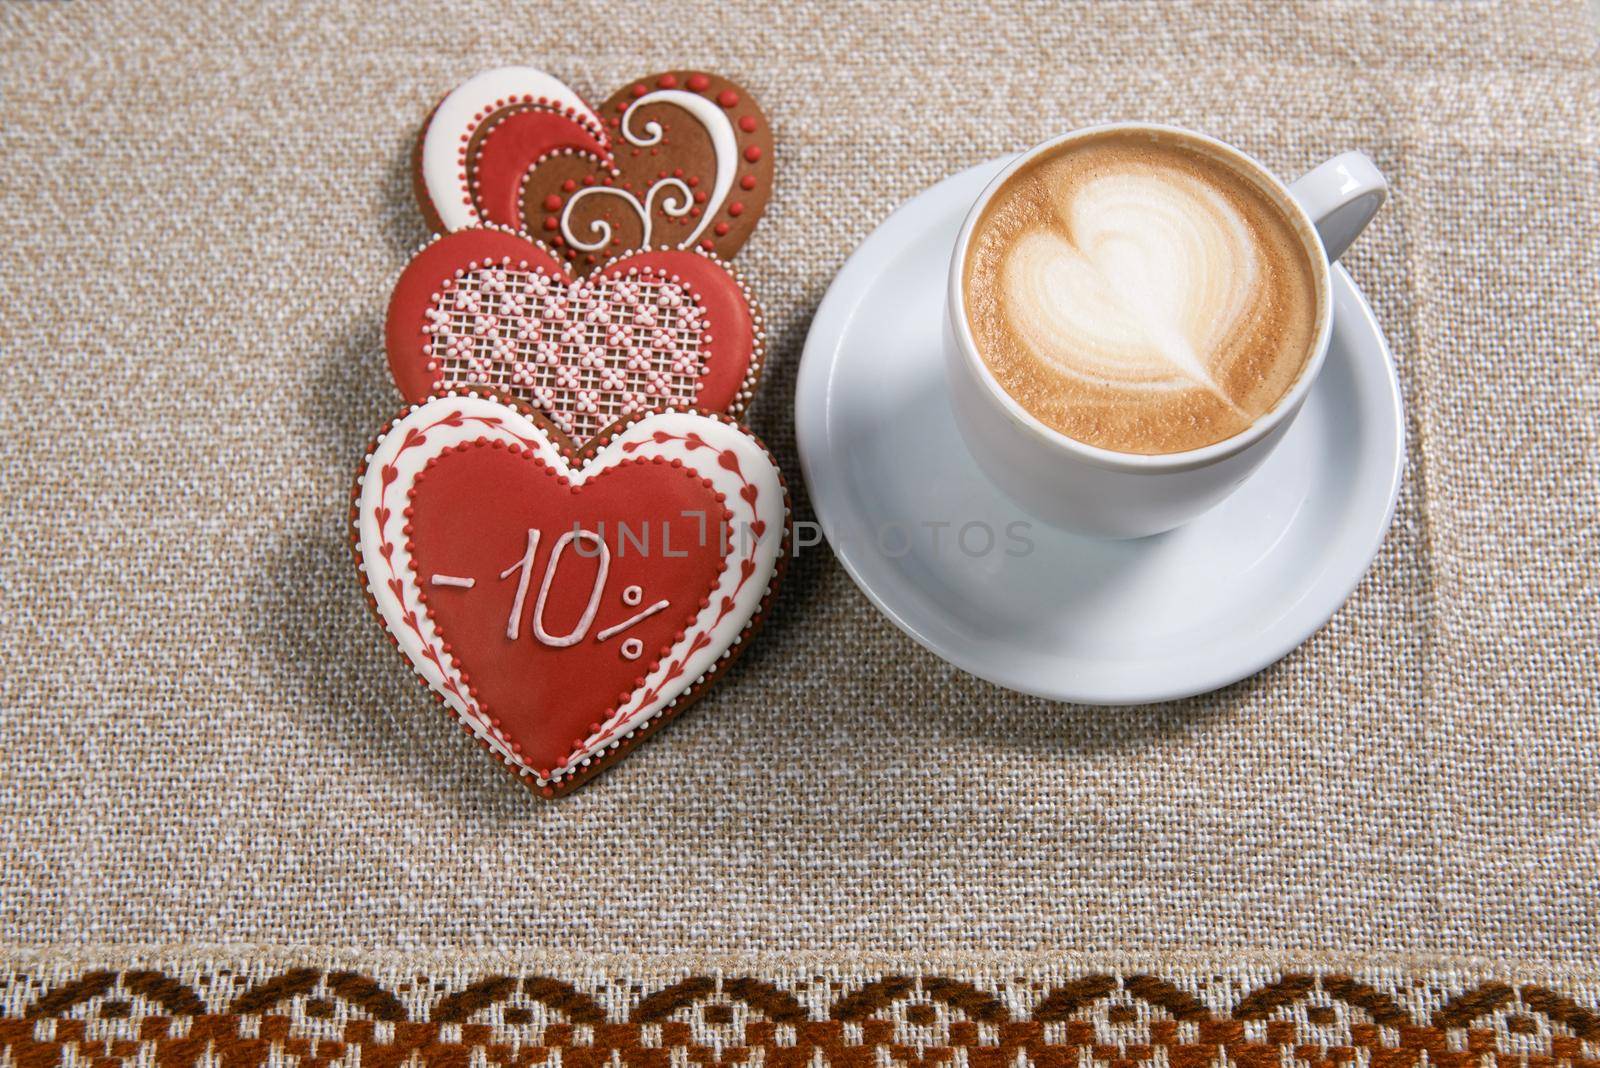 Have a cozy morning. Top view shot of a cup of cappuccino placed near three heart shaped Valentine cookies